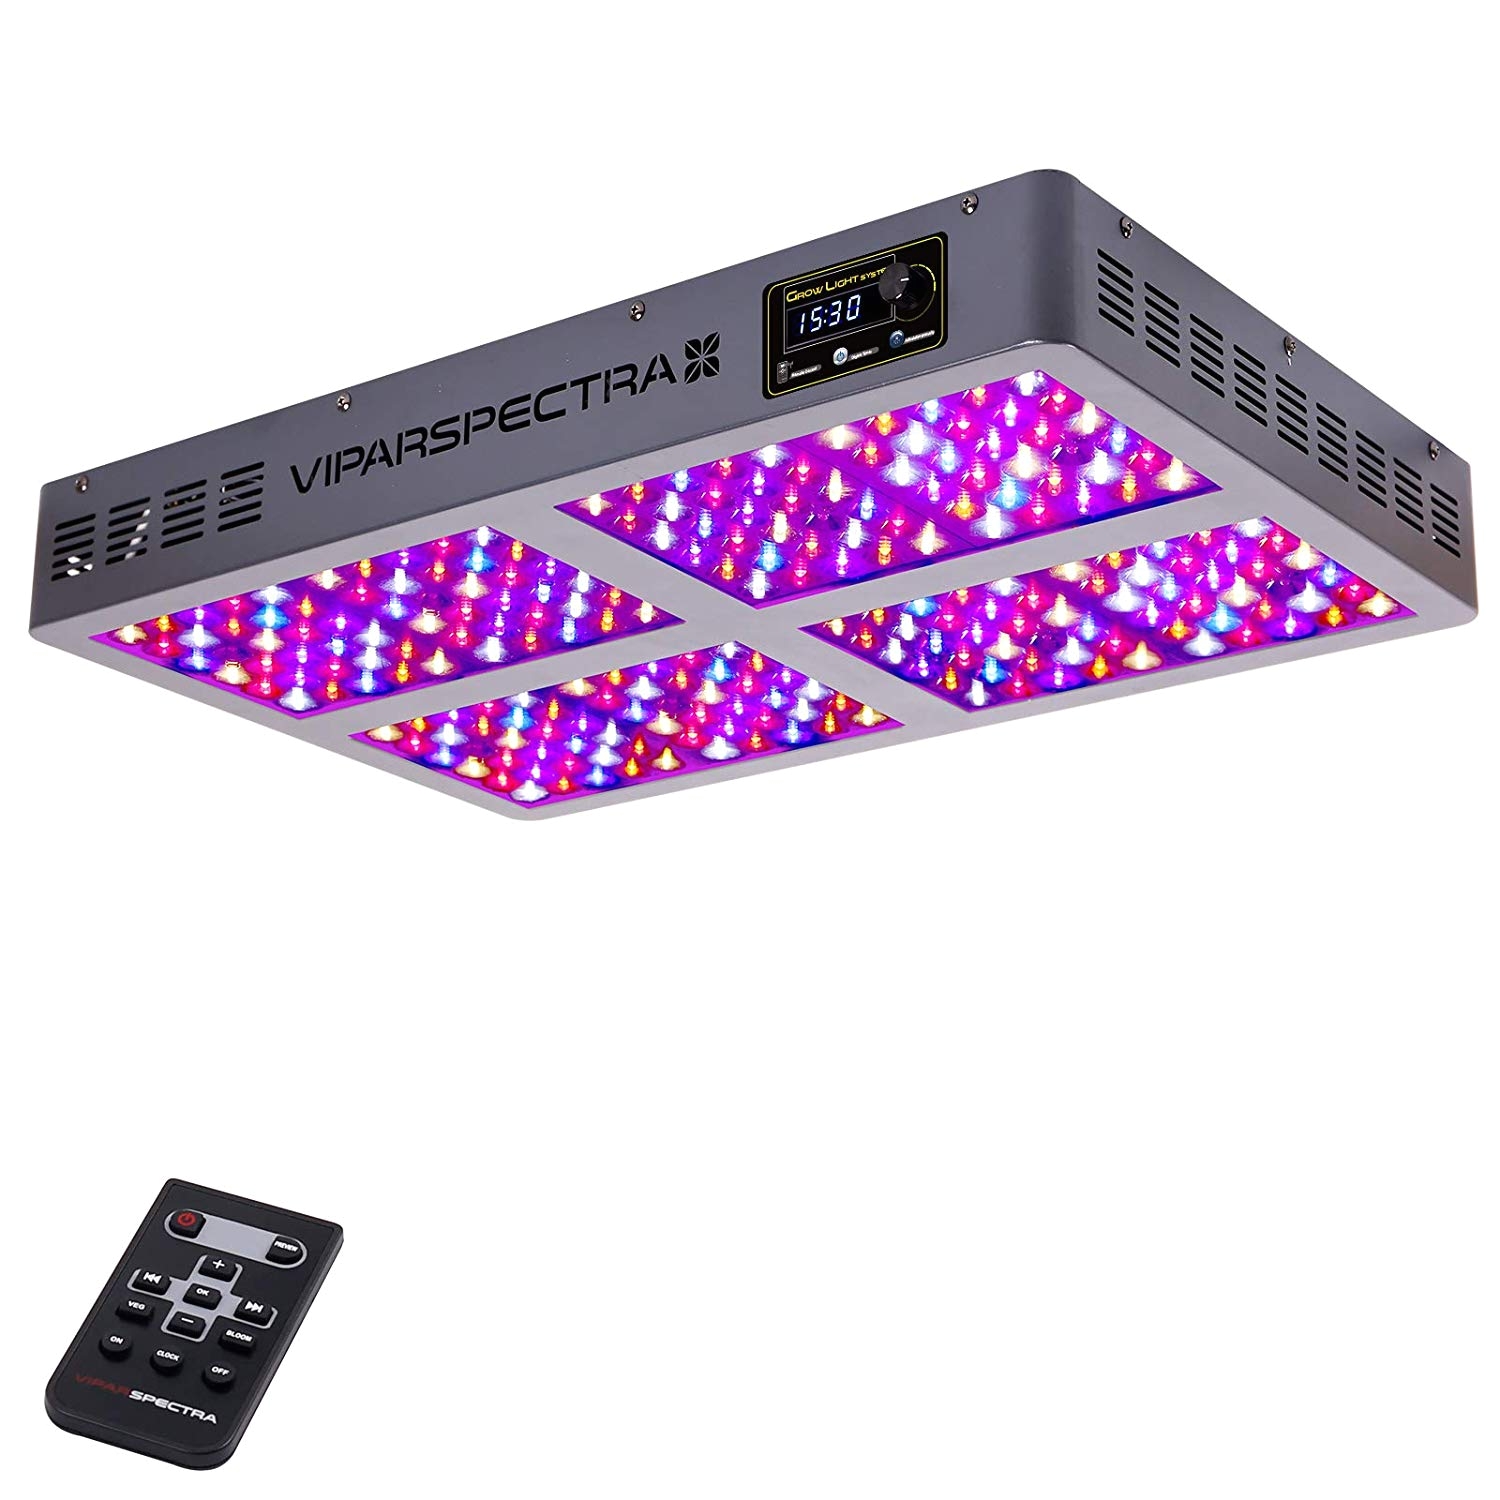 amazon com viparspectra timer control series tc1200 1200w led grow light dimmable veg bloom channels 12 band full spectrum for indoor plants garden